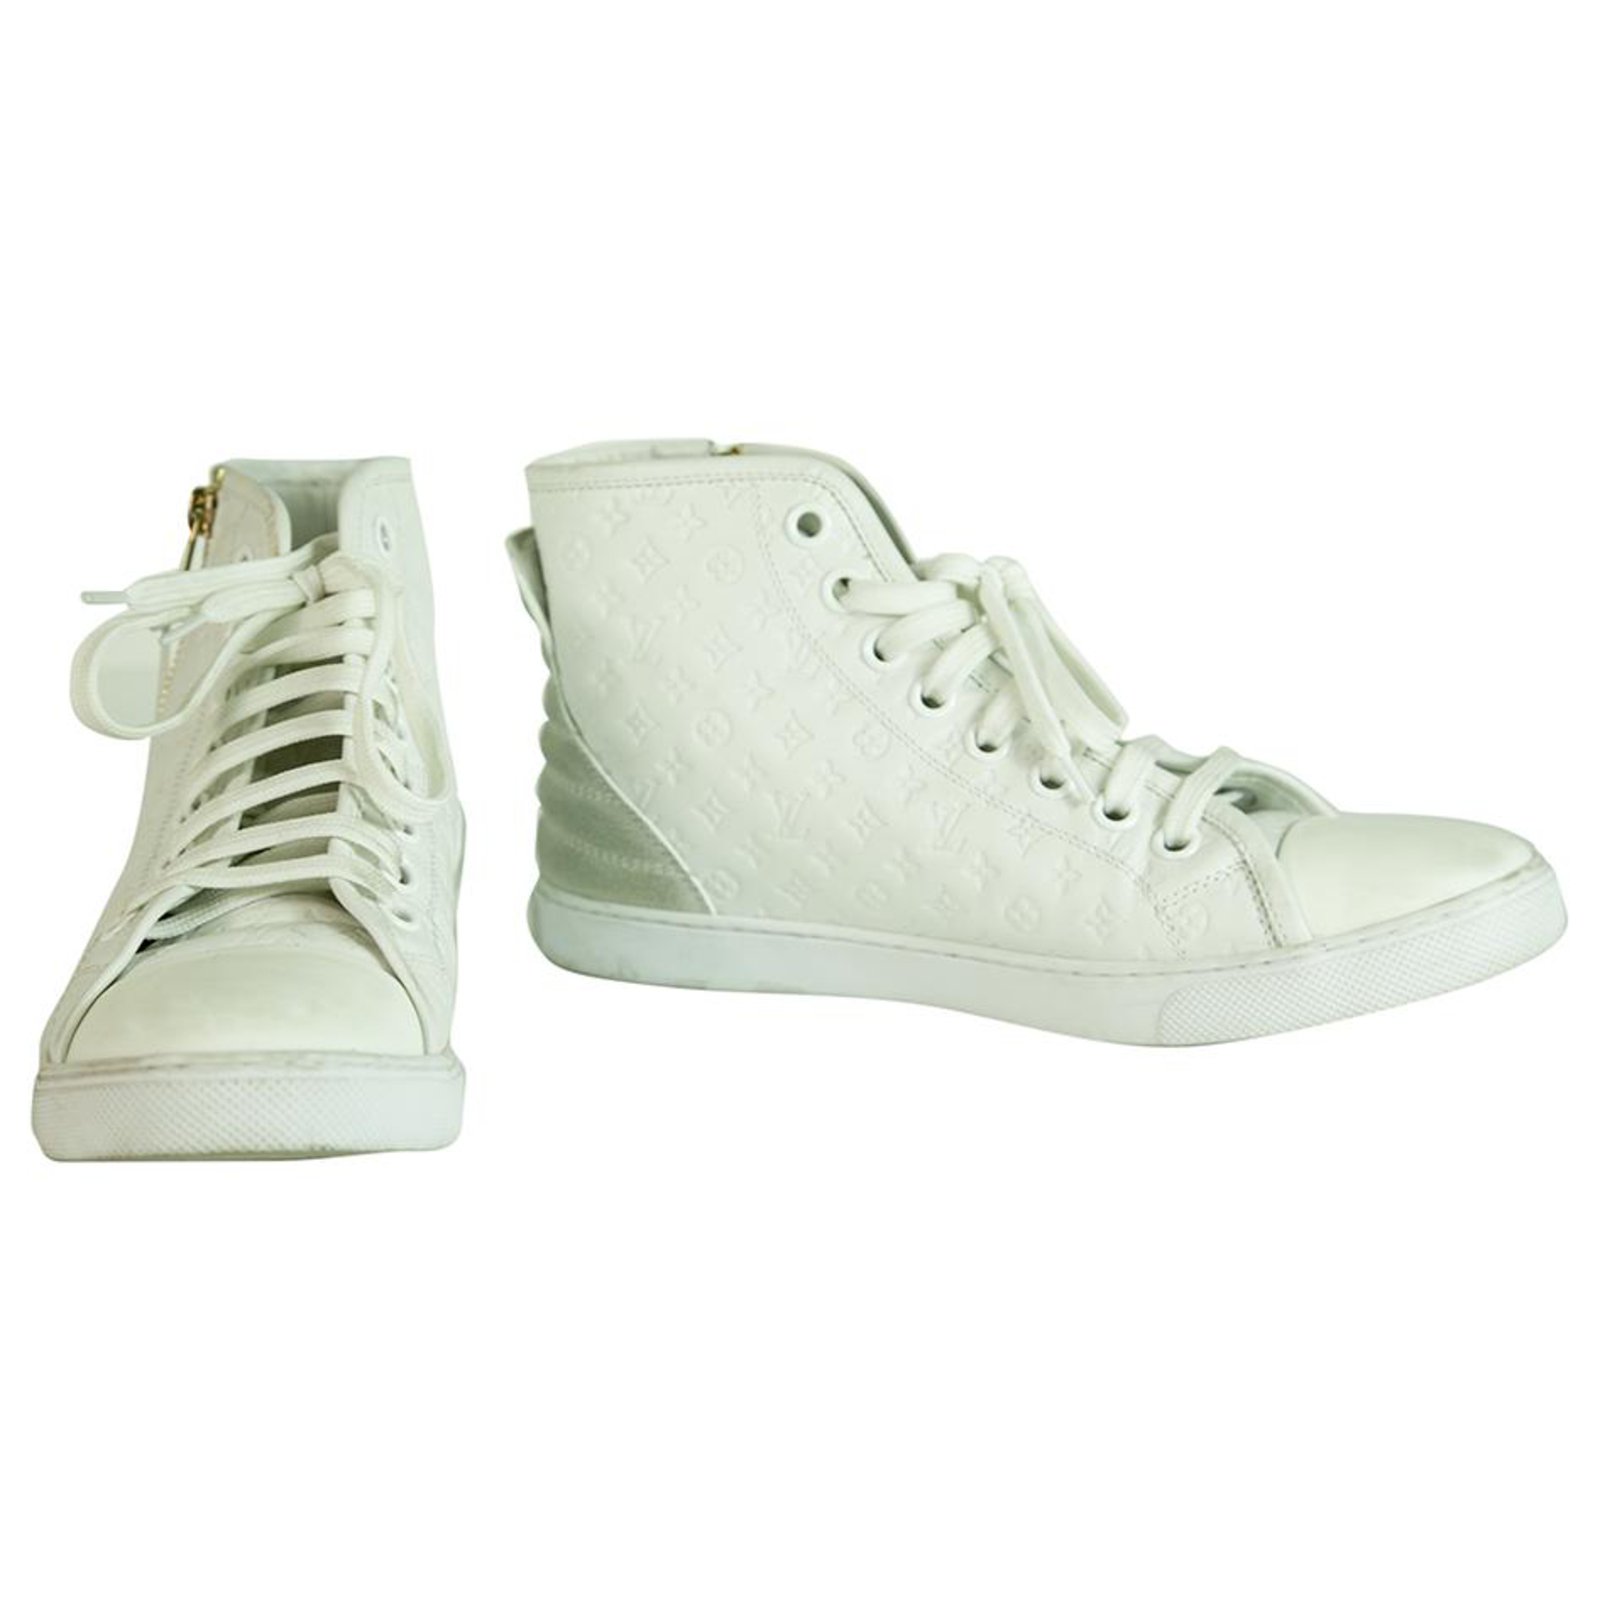 Sneakers Louis Vuitton Louis Vuitton Punchy Empreinte Leather High Top Sneakers Ivory Off White Sz 37,5